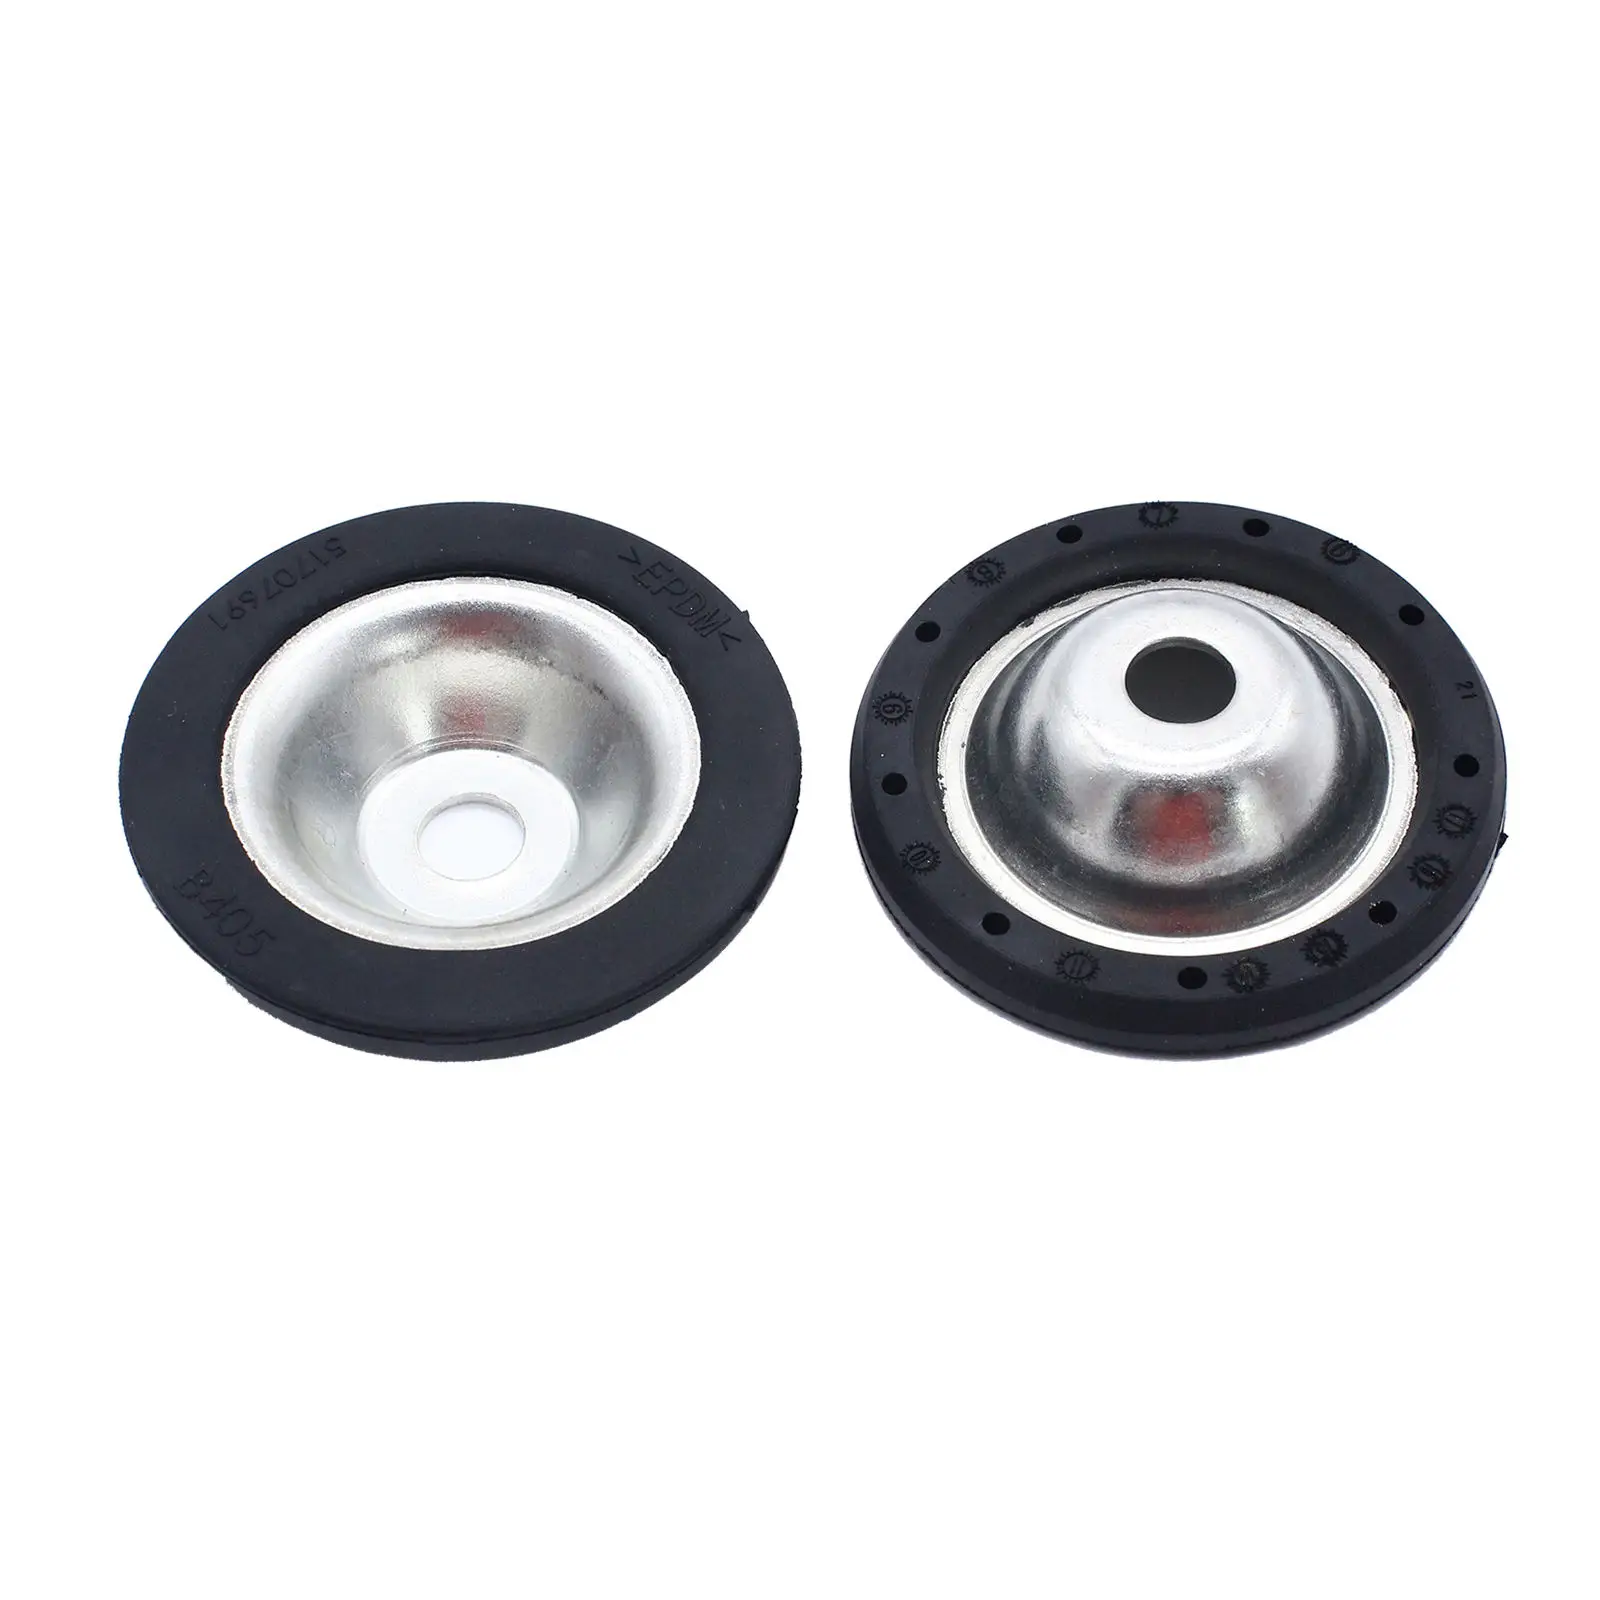 2Pcs Shock Absorber Mount Spring Plate Disc Set for Fiat 500 Shocks Struts Damper Mounting Plate Car Auto Accessories 51707691